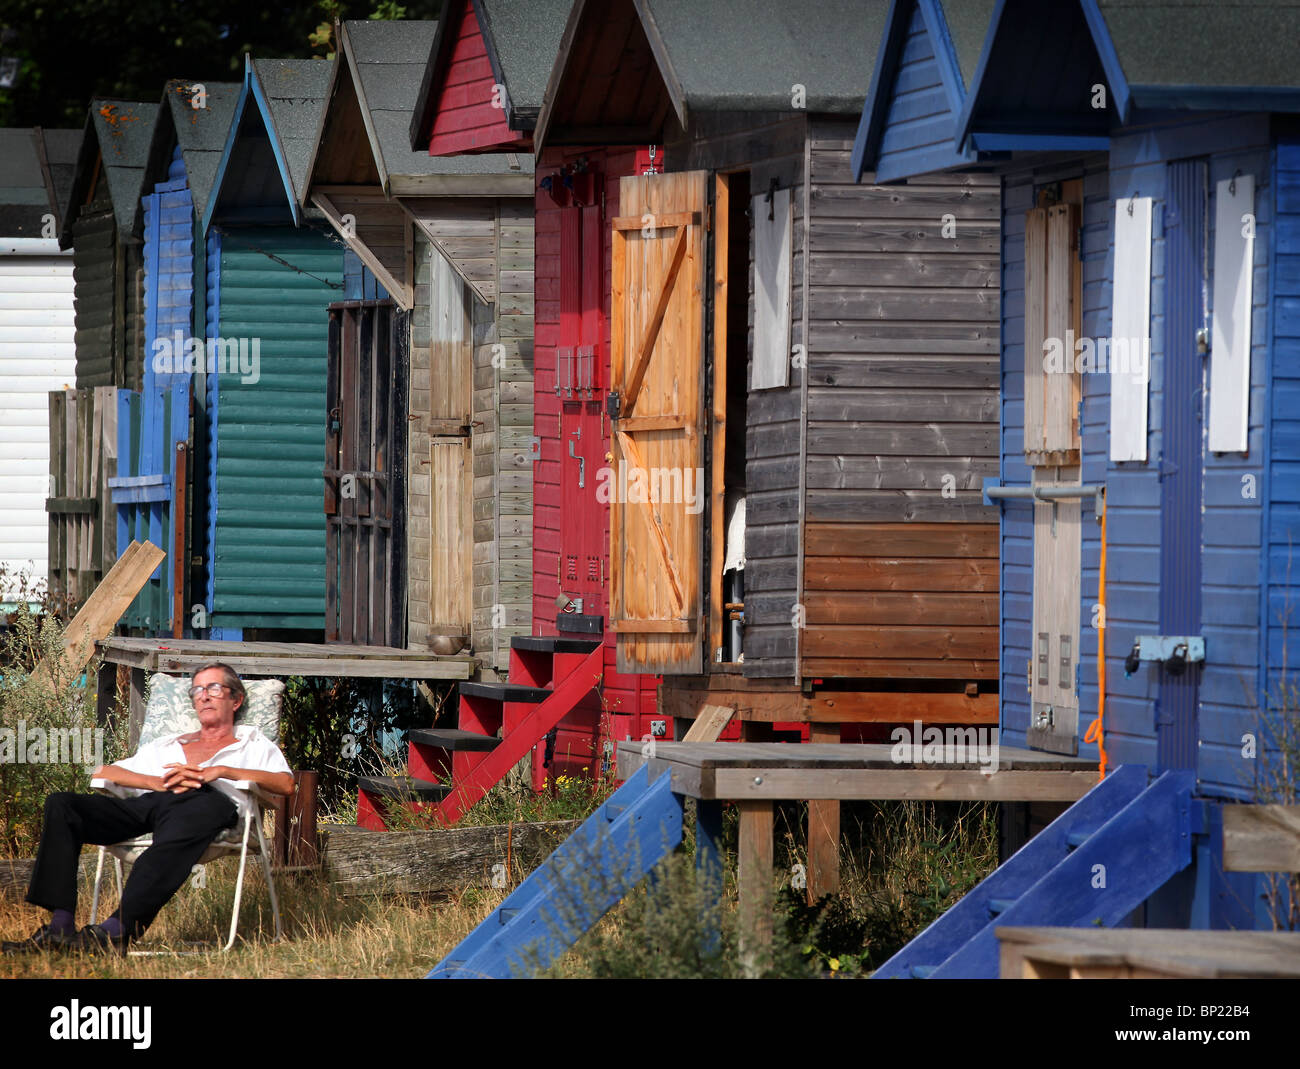 Beach huts pictured in Whitstable, Kent. Stock Photo